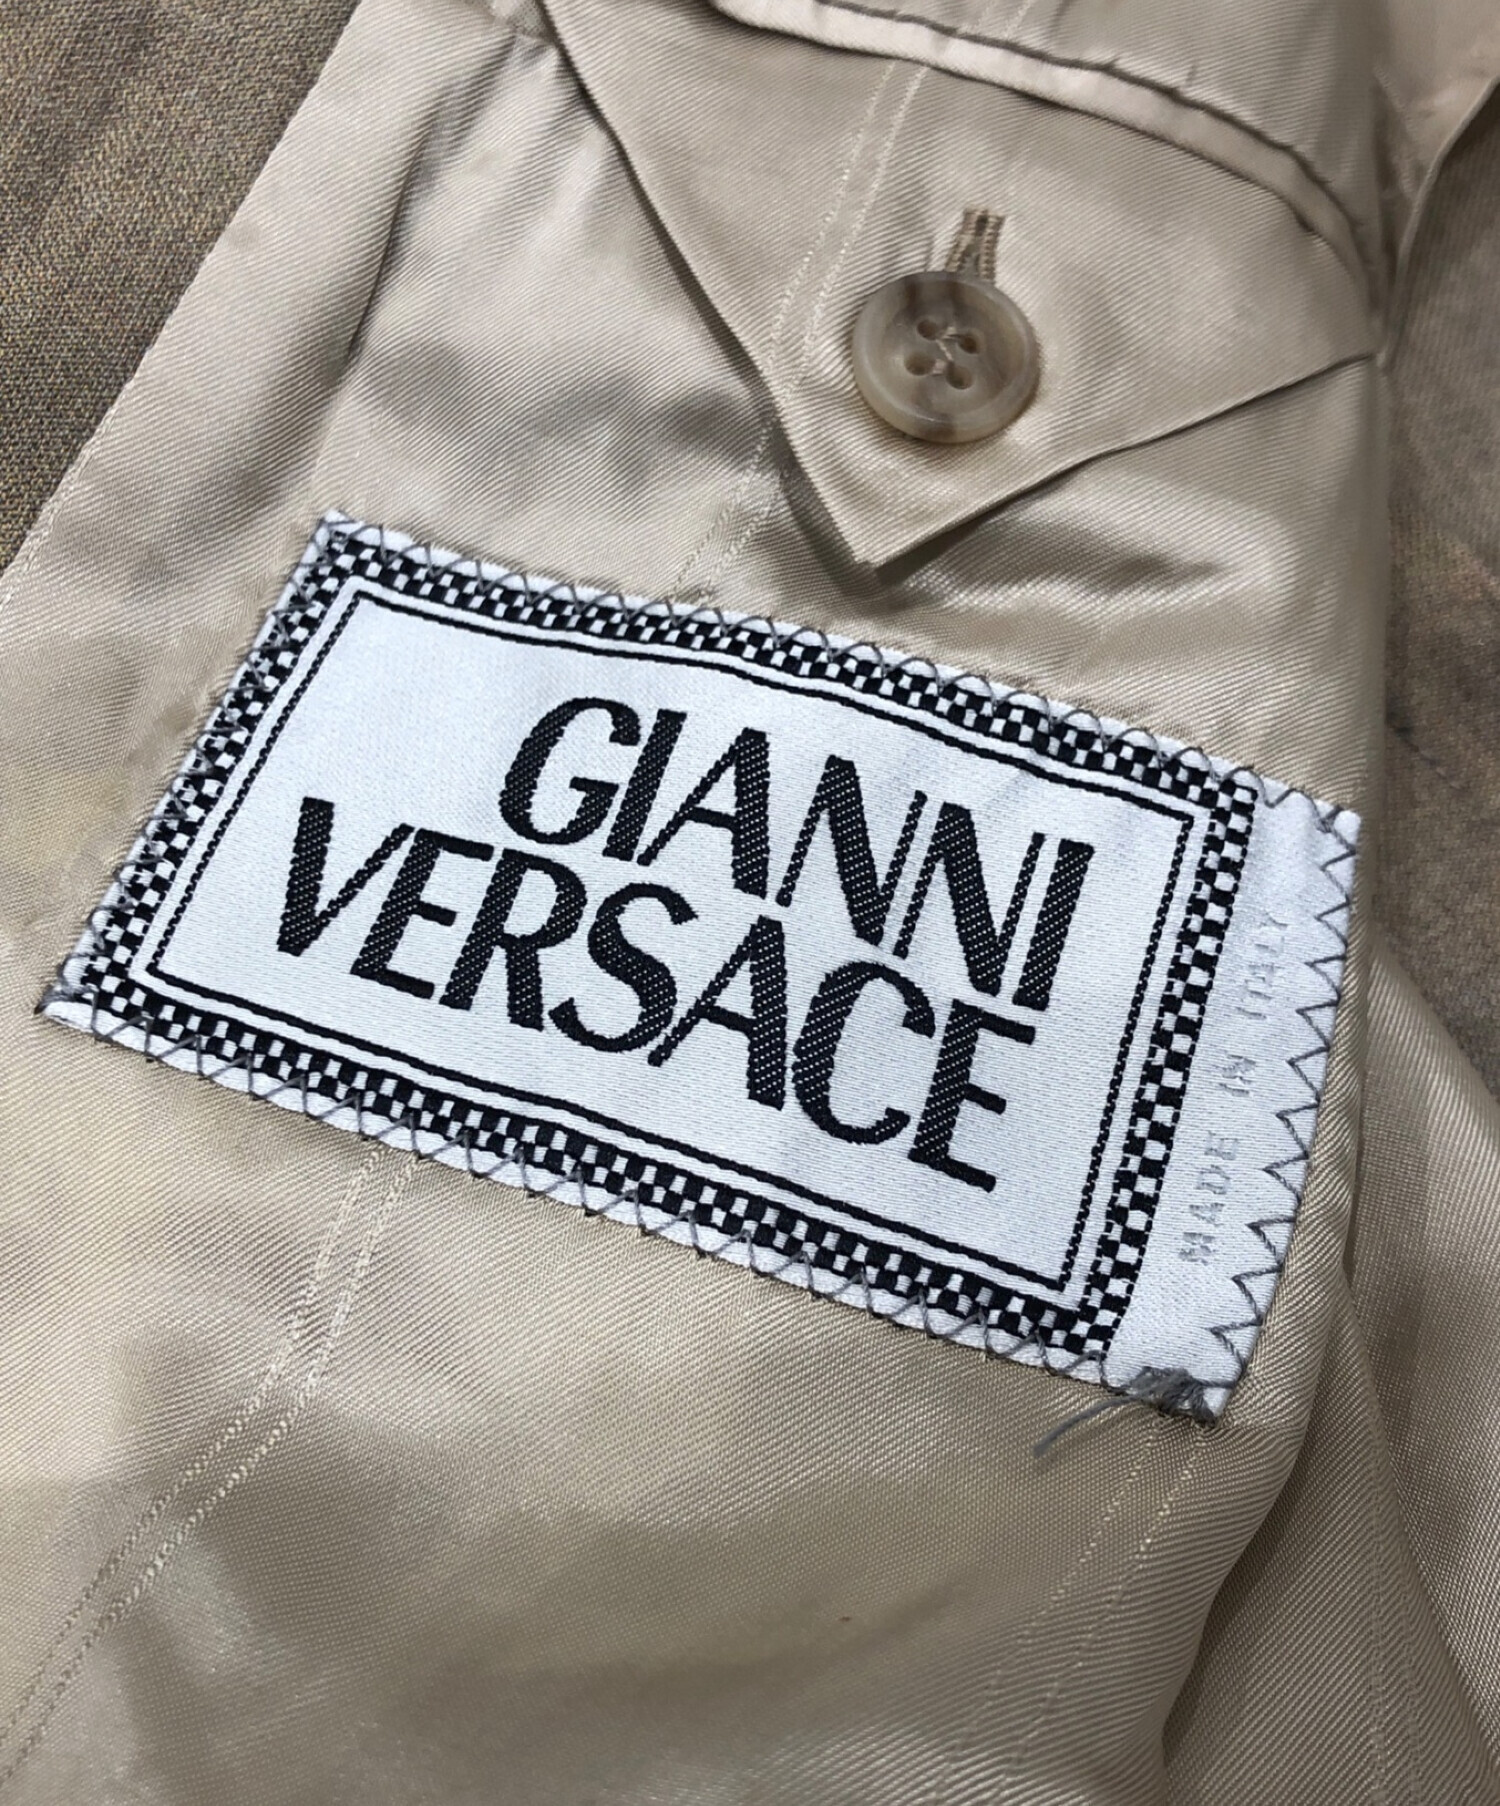 Made in Italy VERSACEジャケット